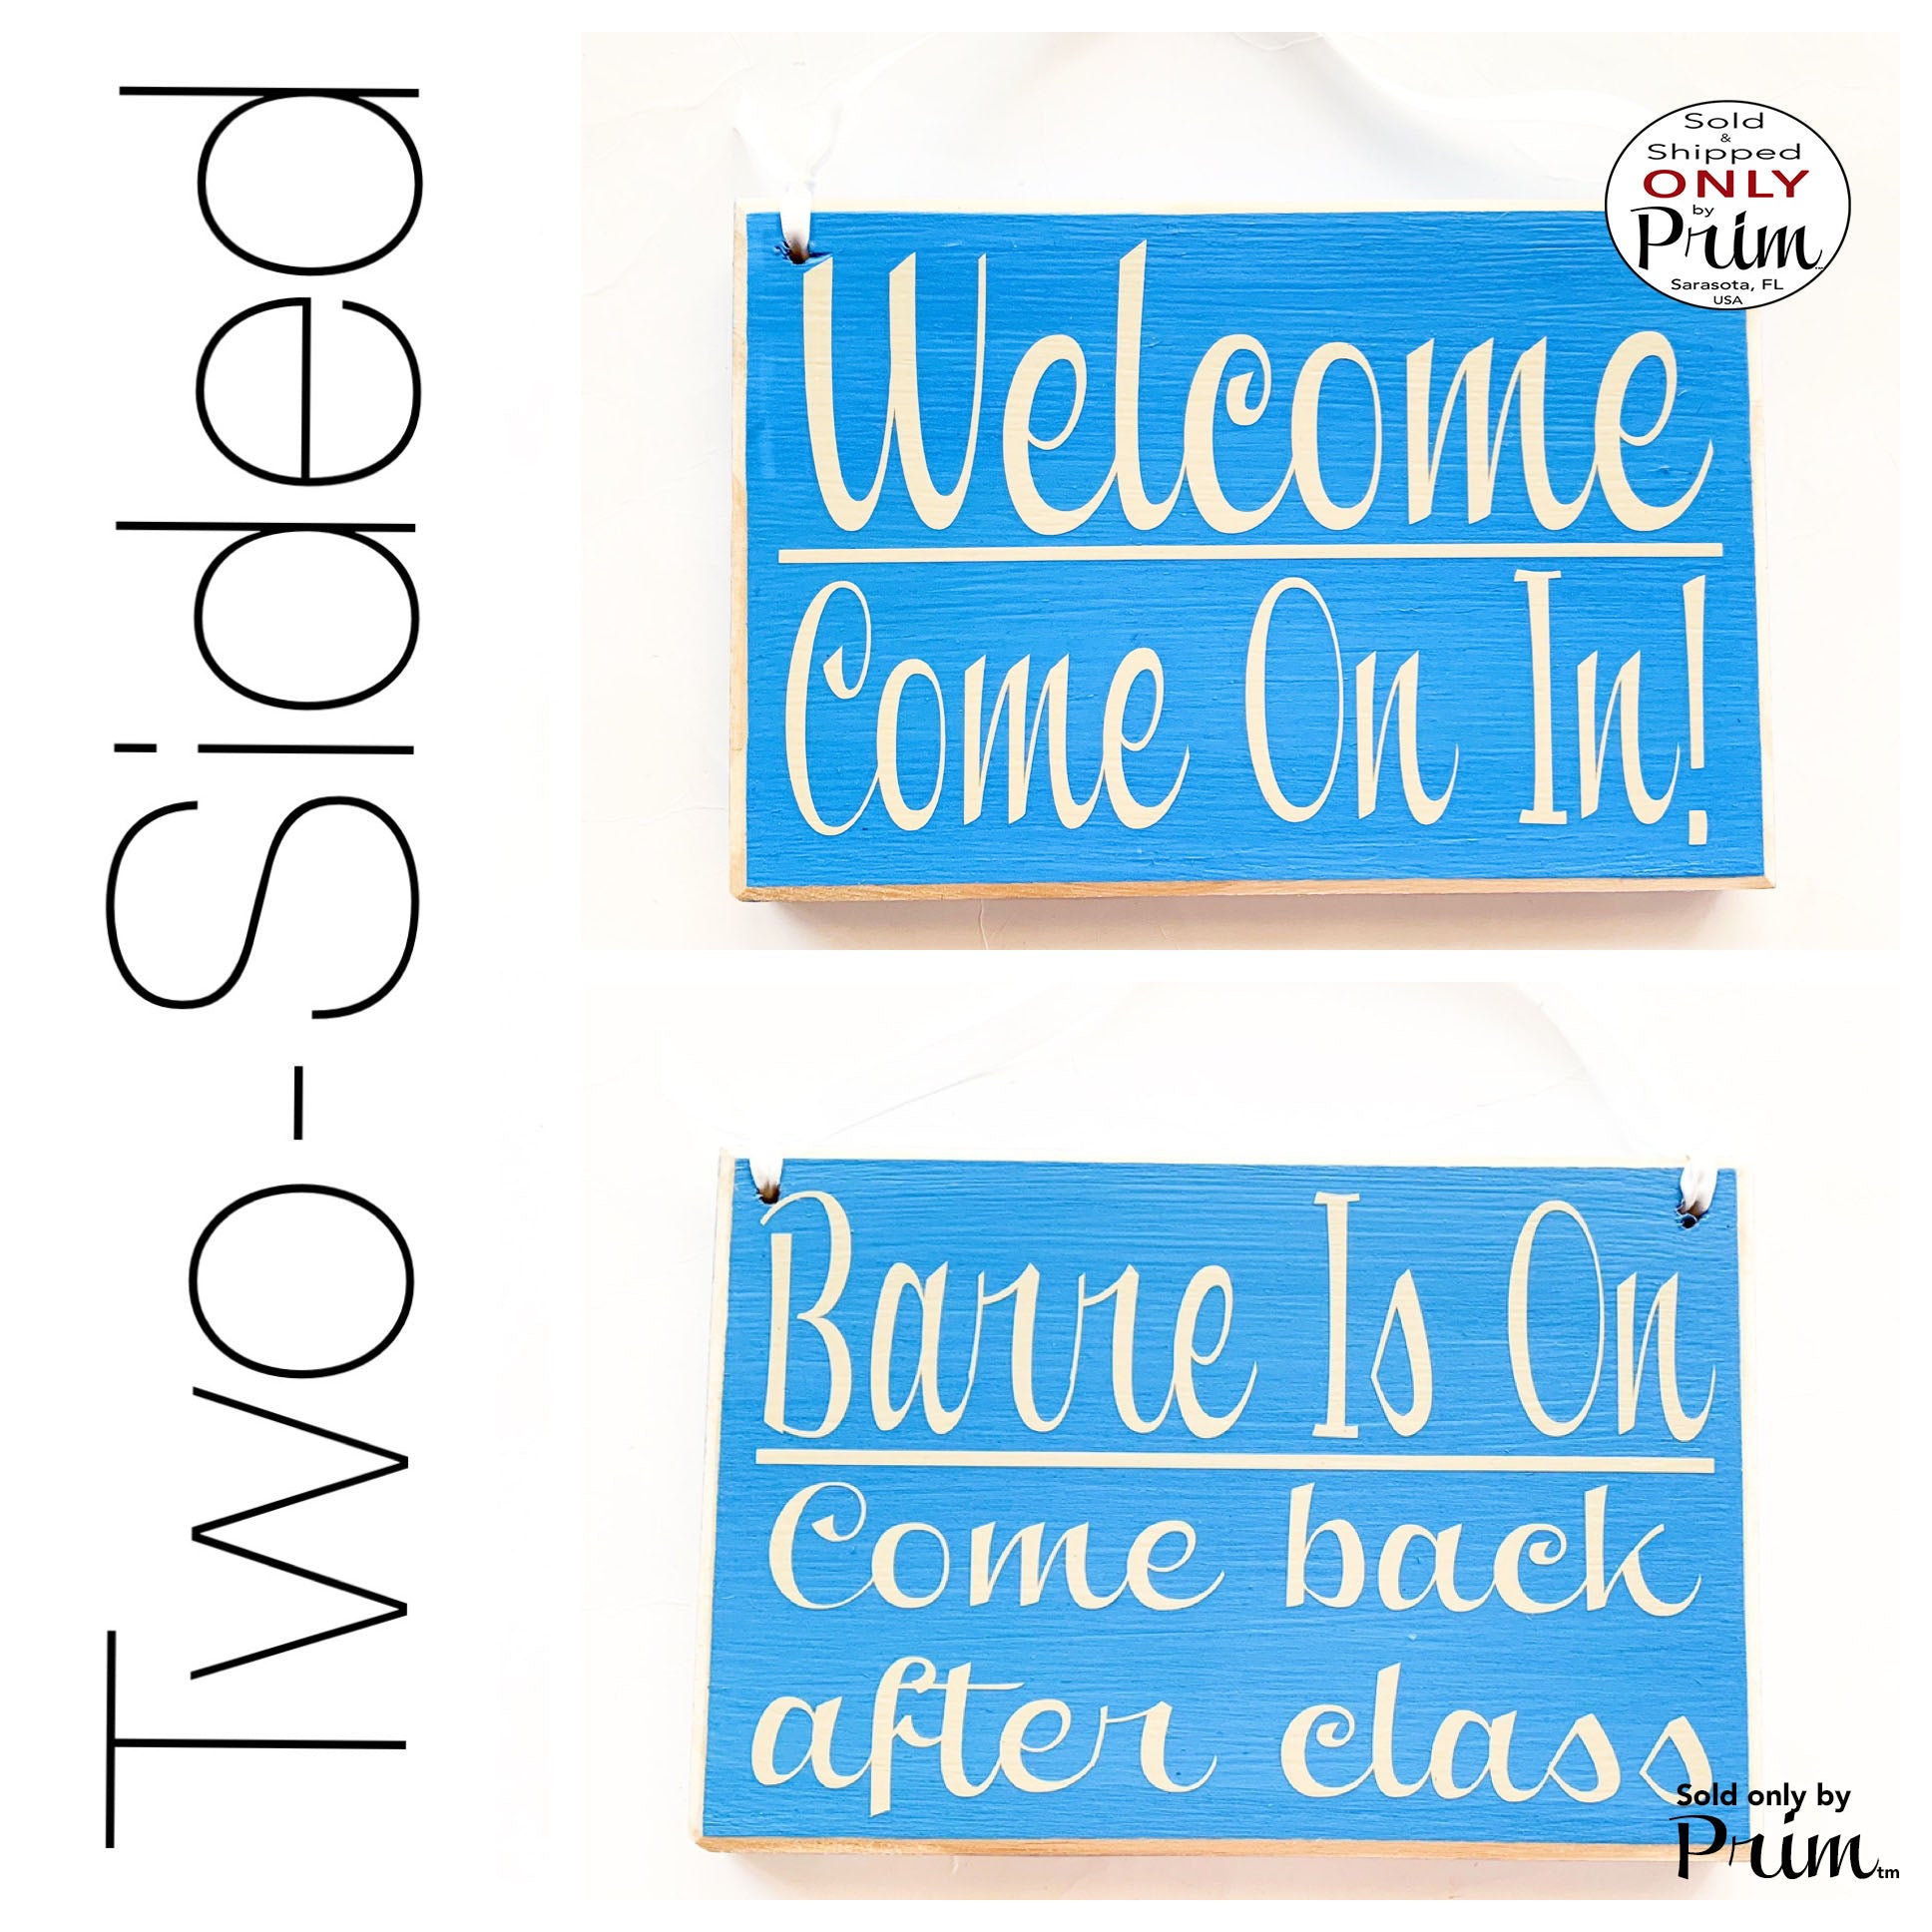 8x6 Welcome Come On In Barre Is On Come Back After Class Custom Wood Sign | Fitness Gym Club Exercise Ballet Pure In Session Come Again